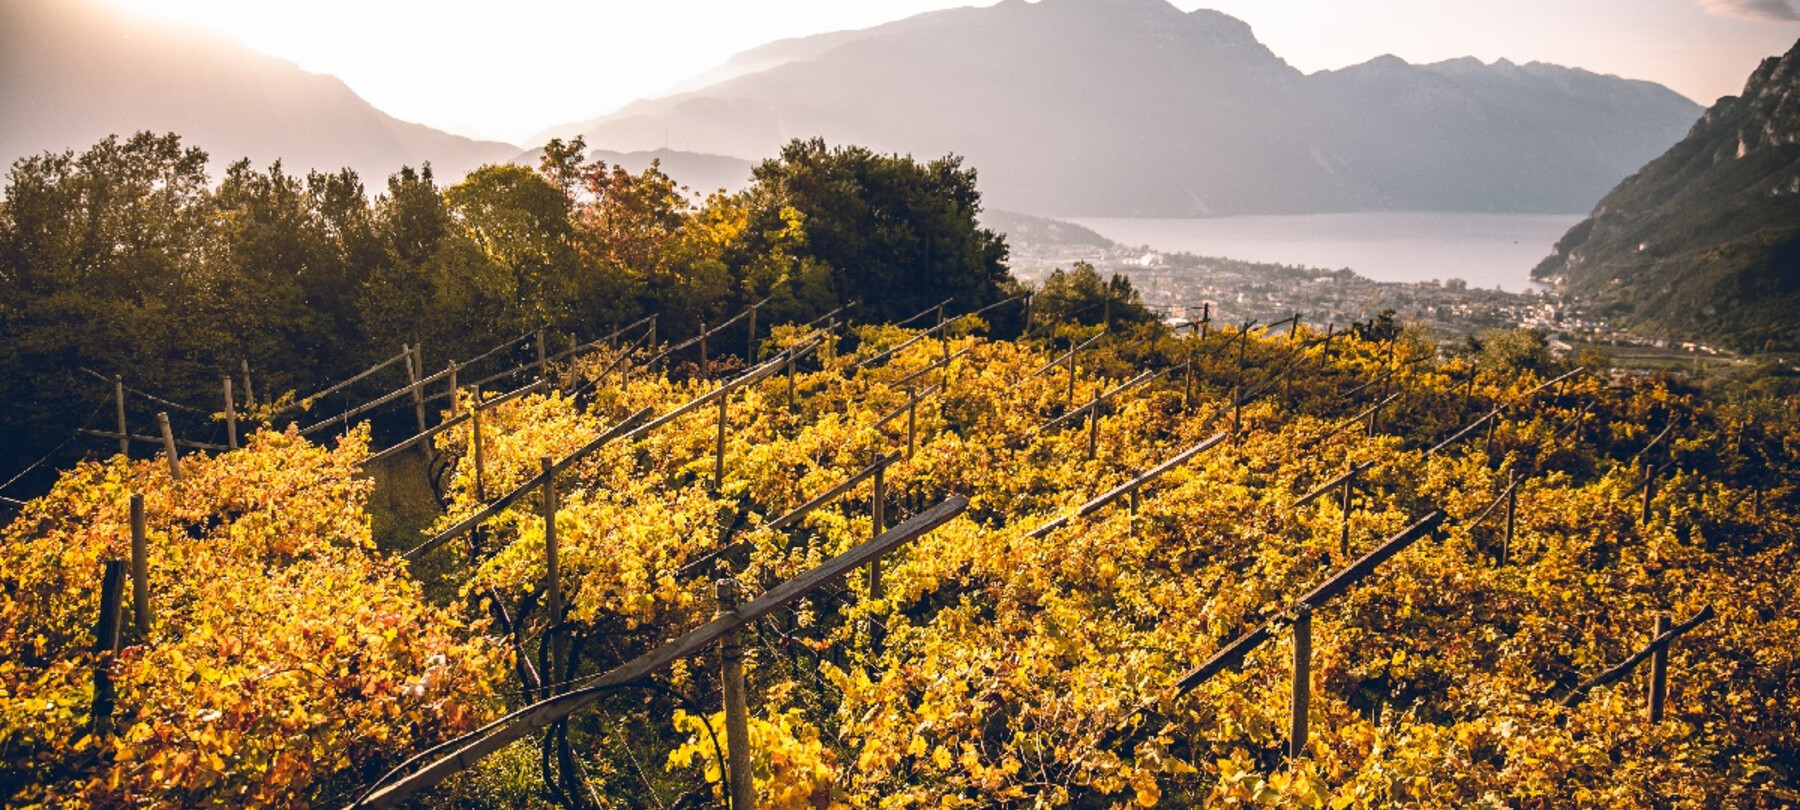 Trentodoc Festival: From 20 to 22 September in Trento and in the Trentino cellars